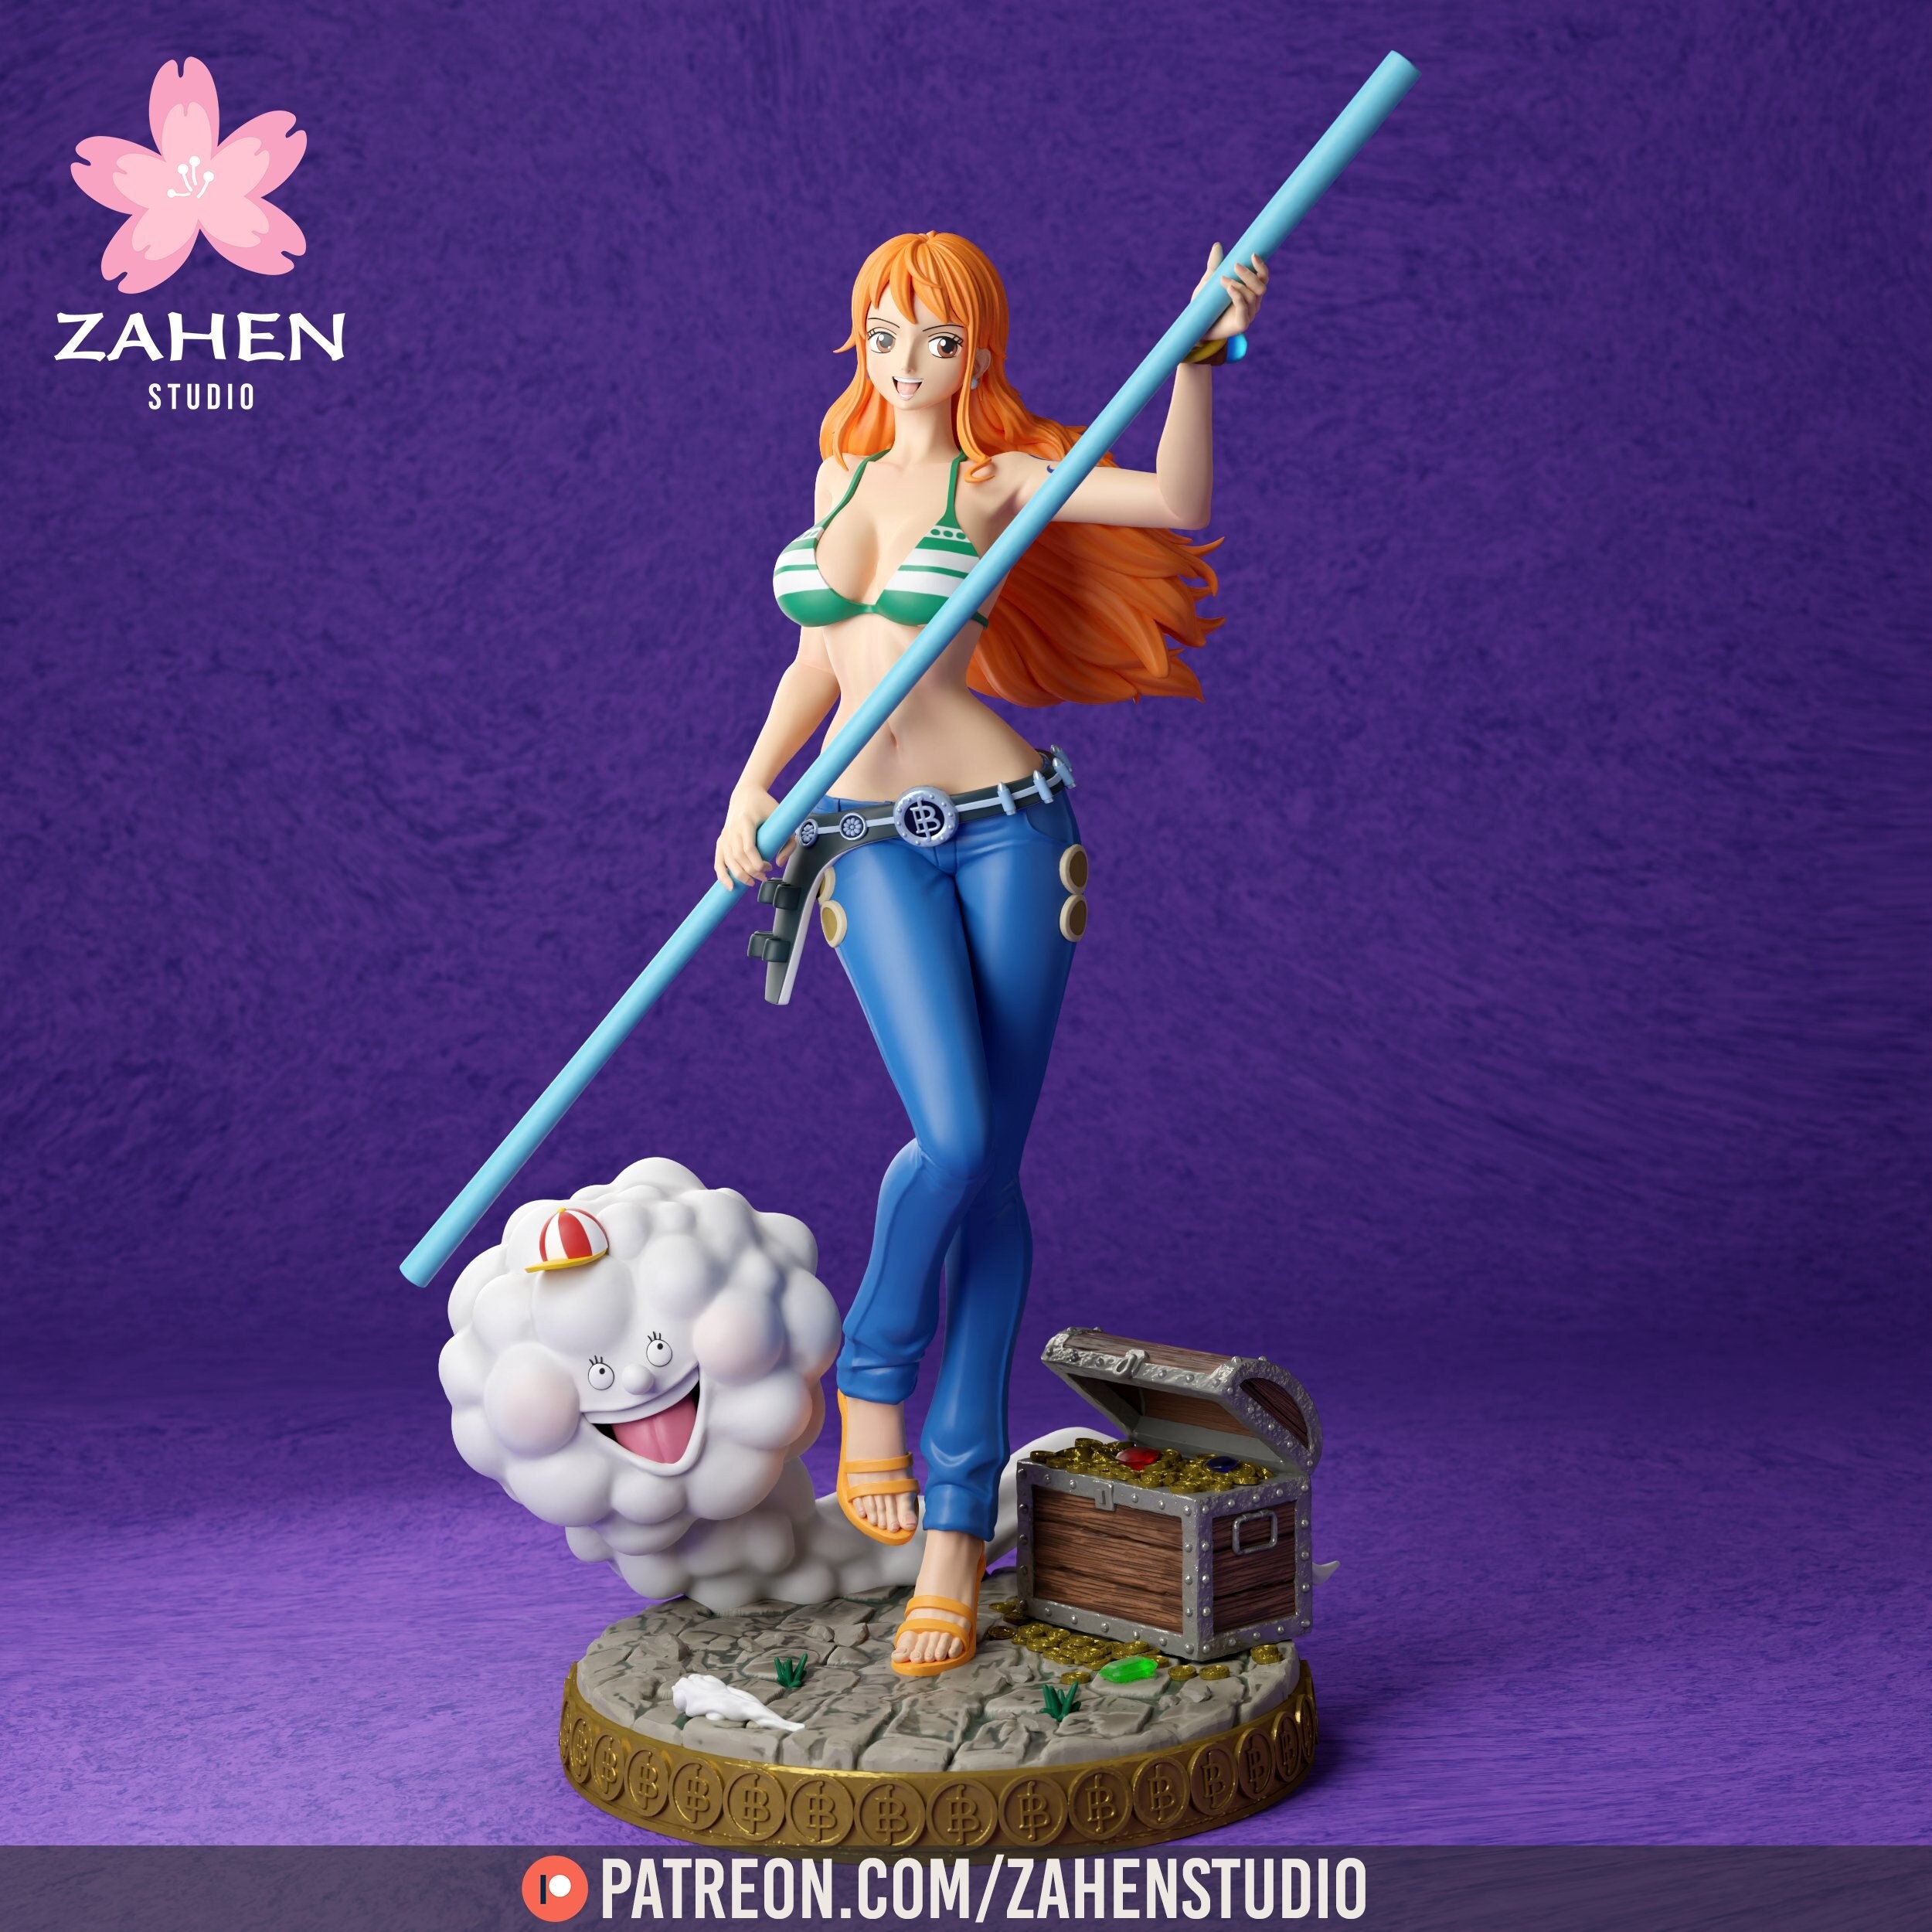 One Piece Figurine Nami The Thief In Luffy Outfit OMN1111